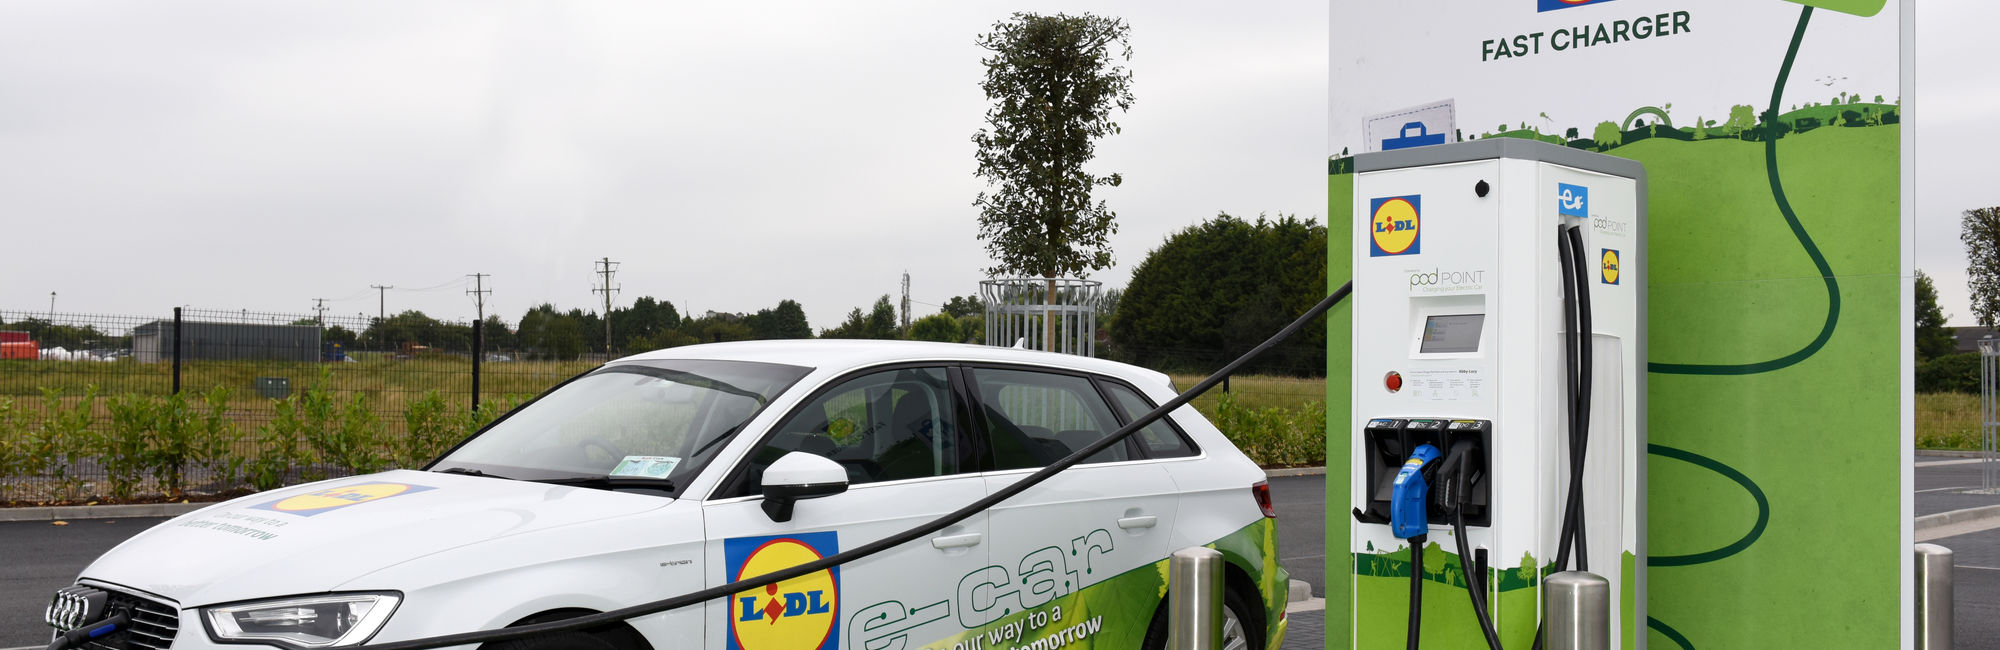 Lidl Ireland commits to the largest network of electric vehicle charging